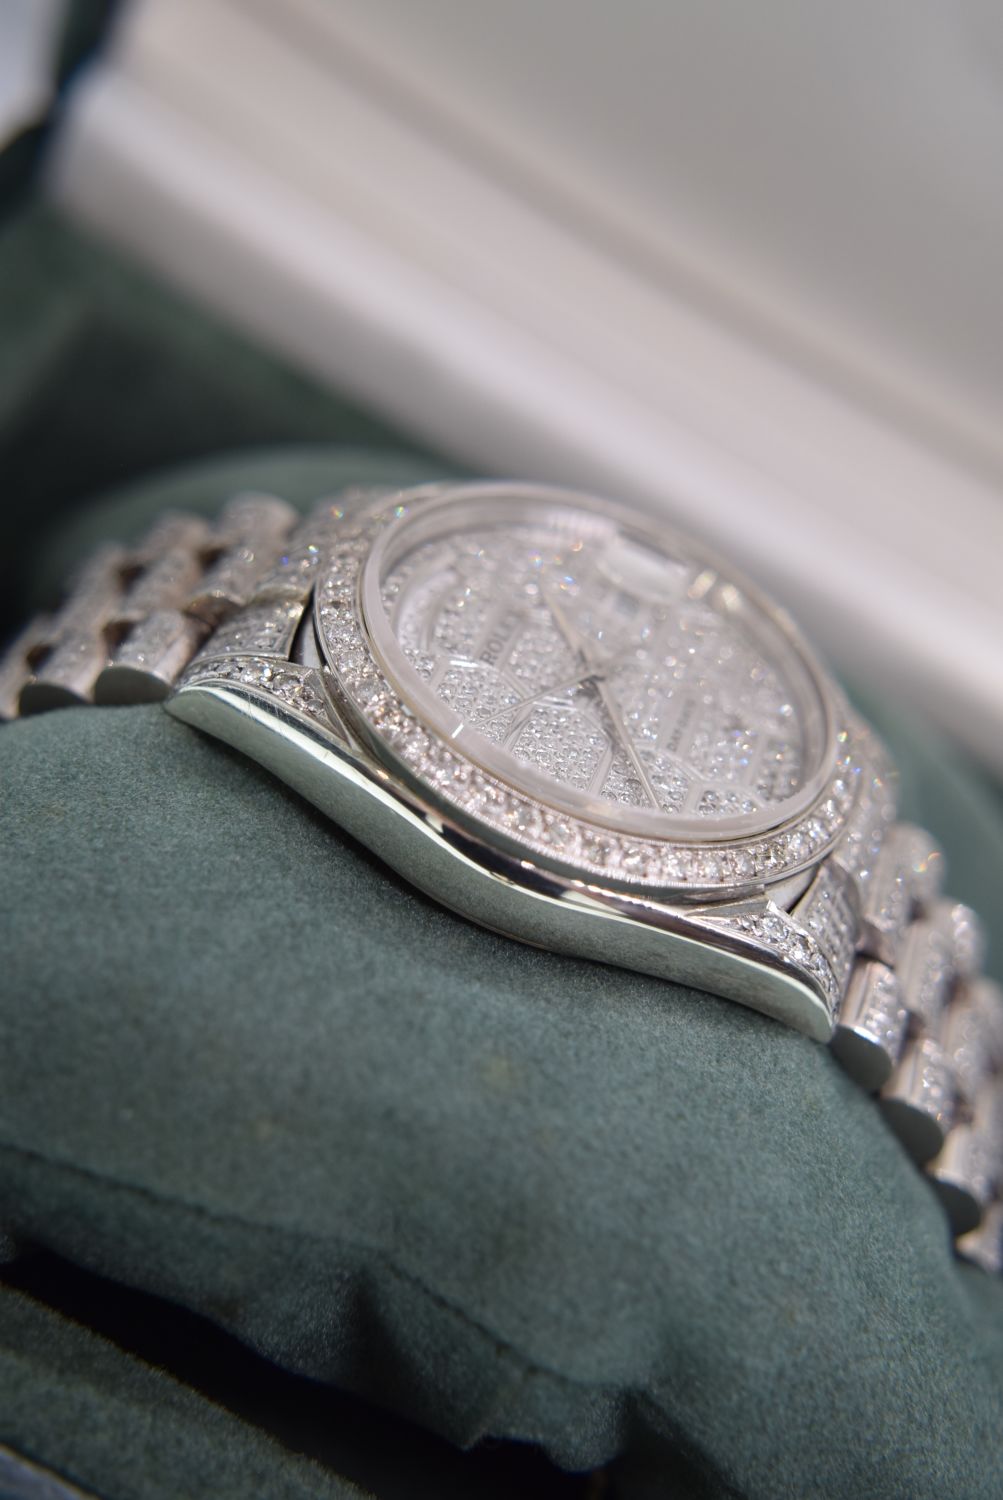 WATCH MARKED ROLEX DAY DATE (DIAMOND ENCRUSTED) MO - Image 6 of 13